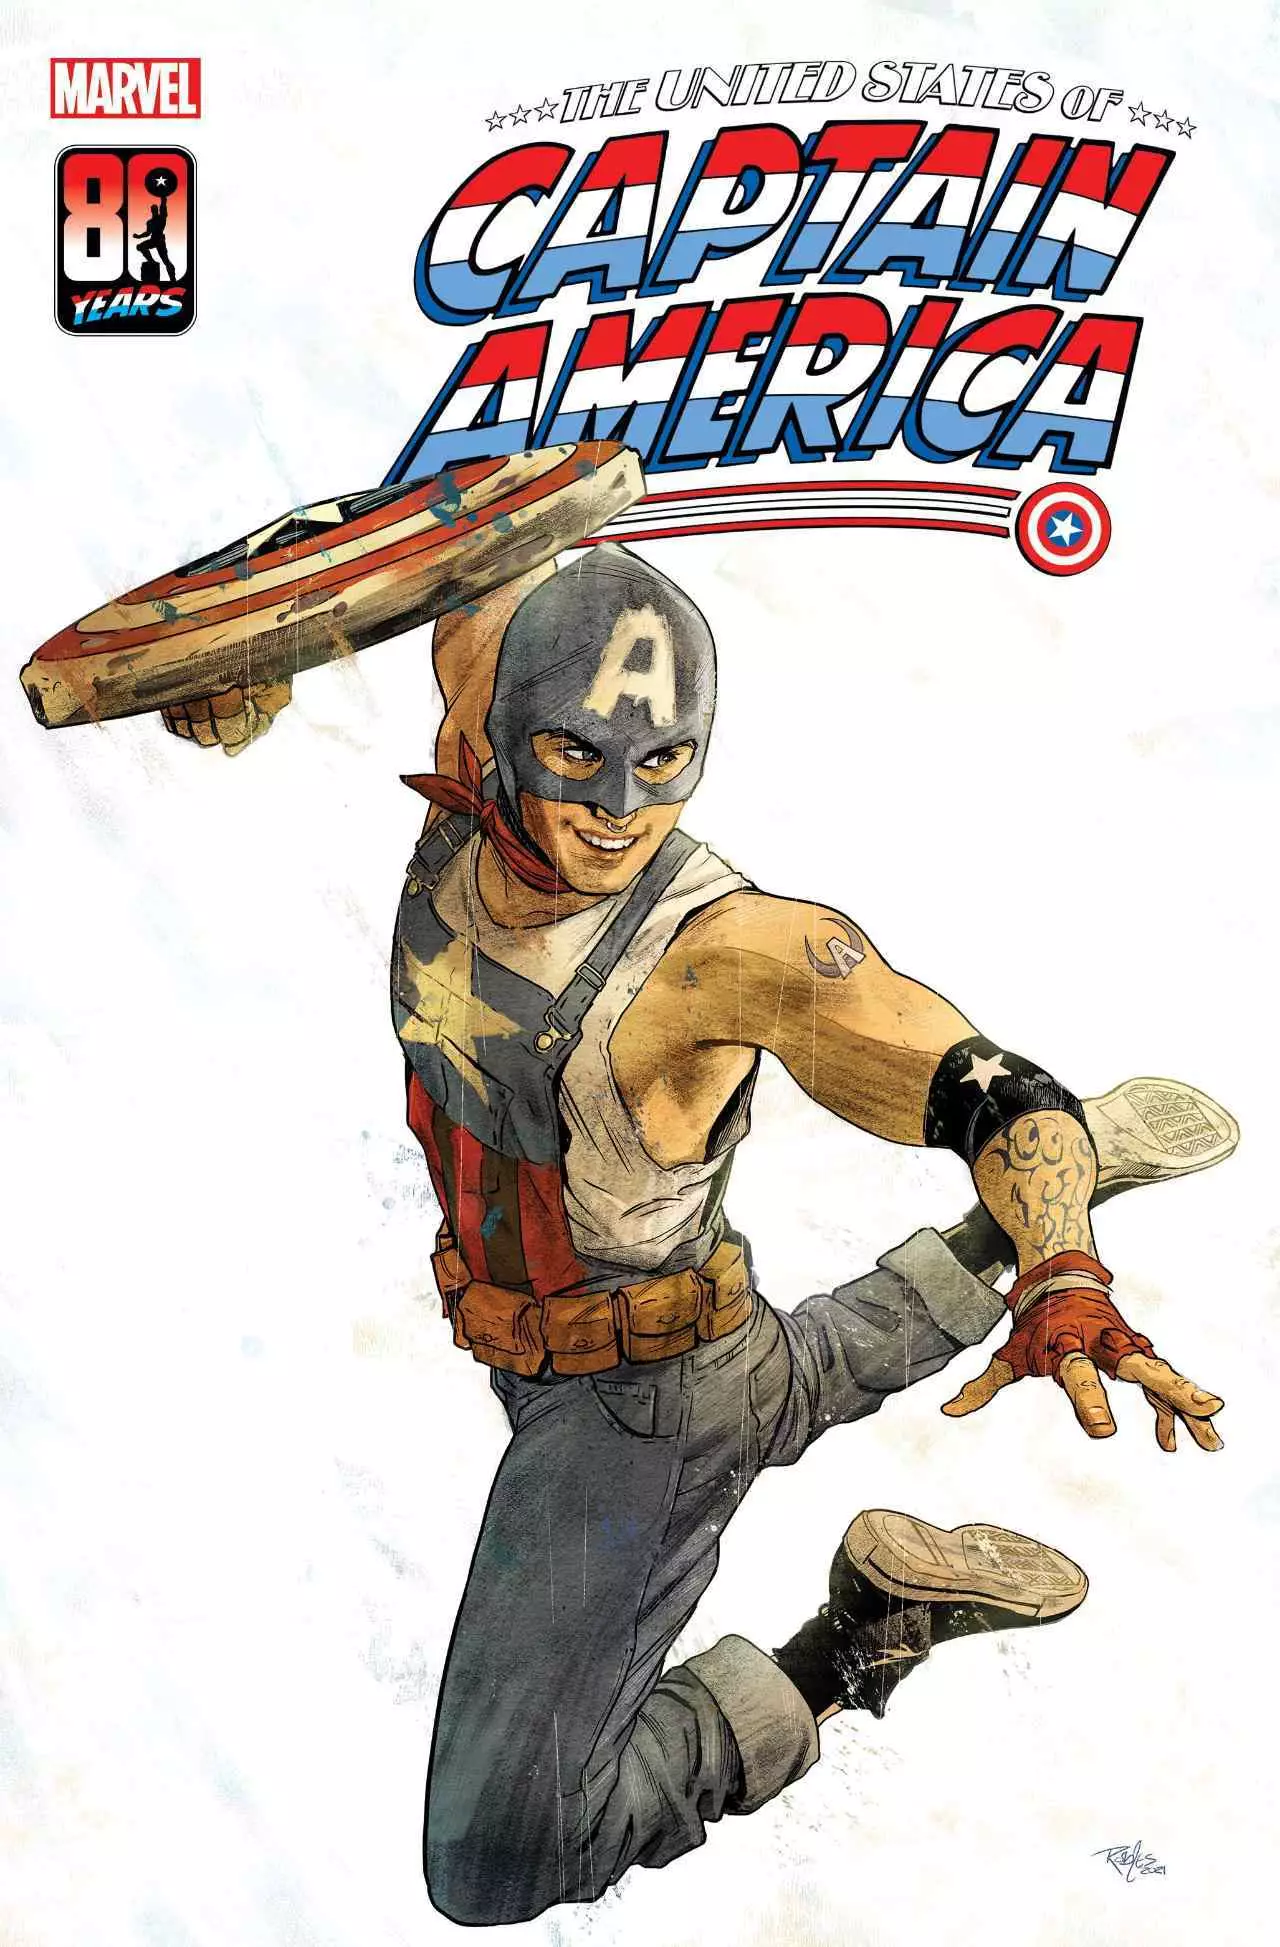 The United States of Captain America cover art /